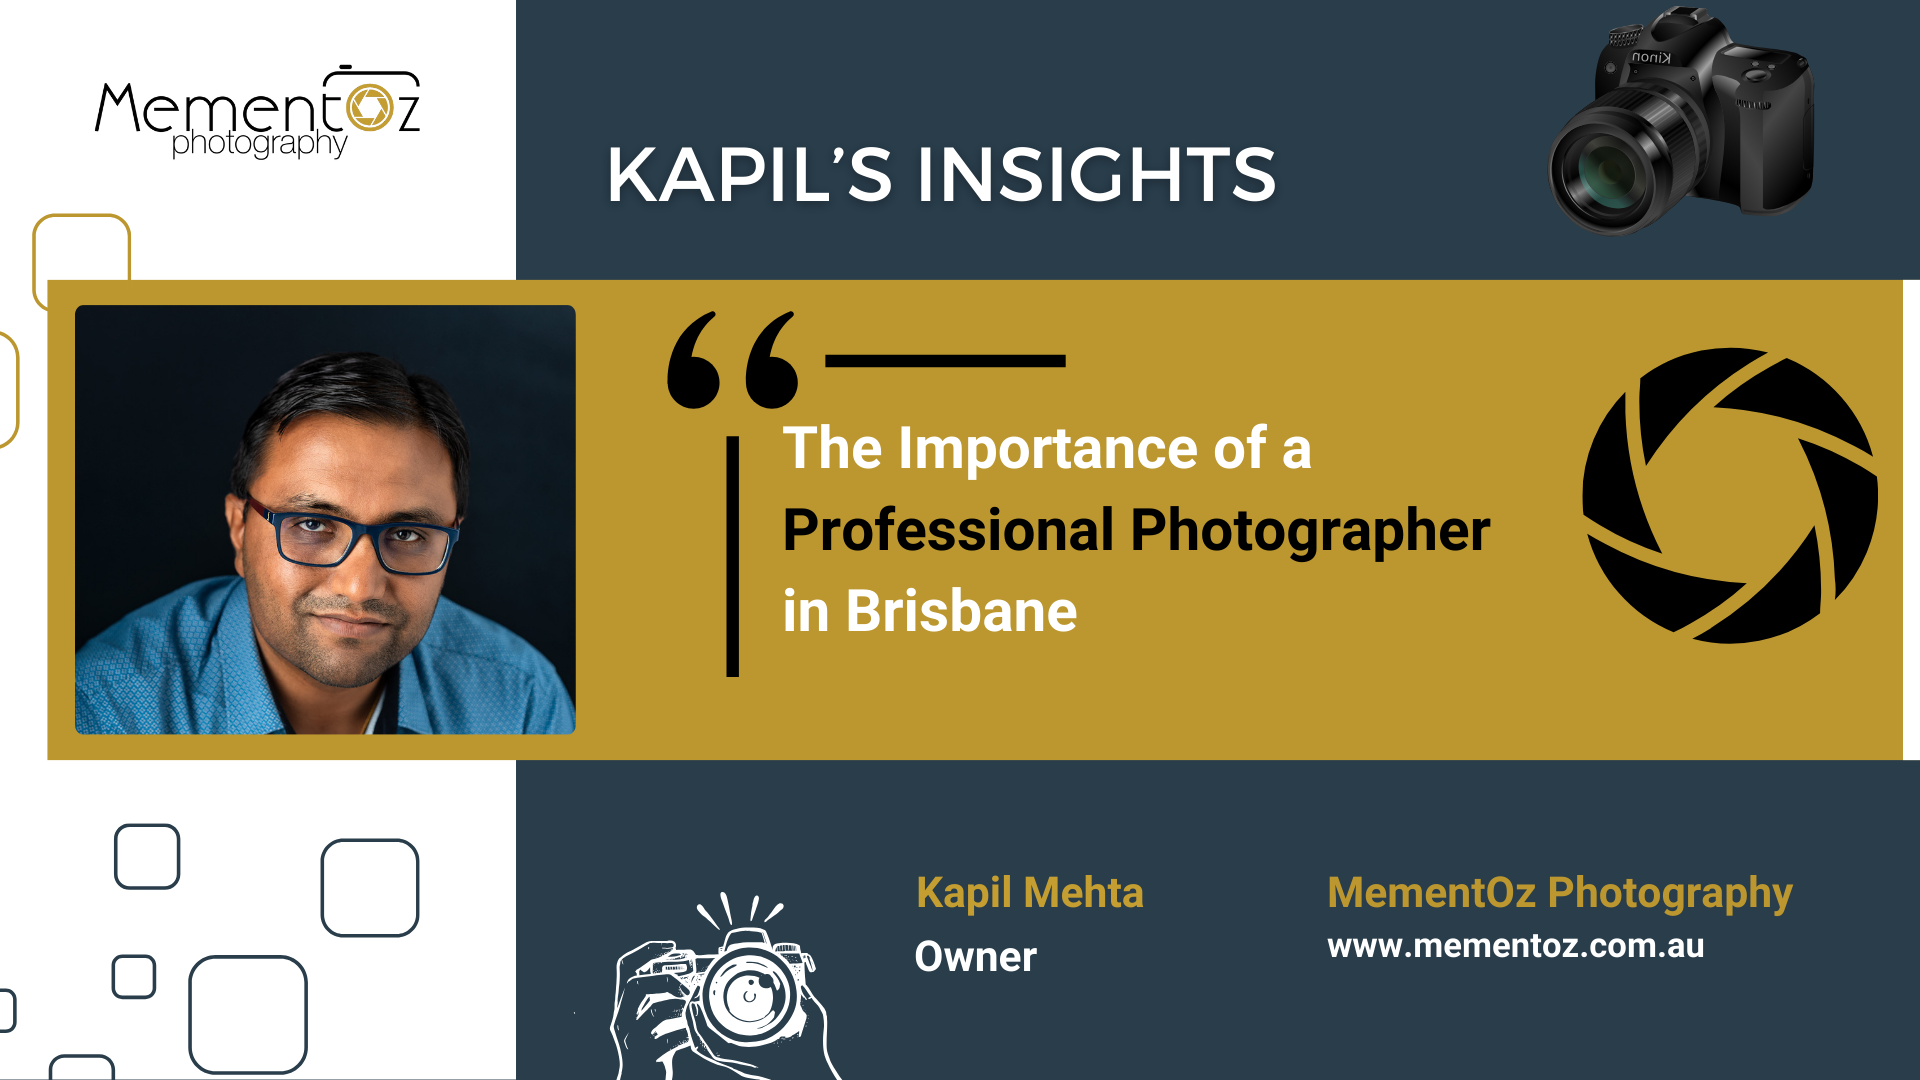 Kapil’s Insights: The Importance of a Professional Photographer in Brisbane